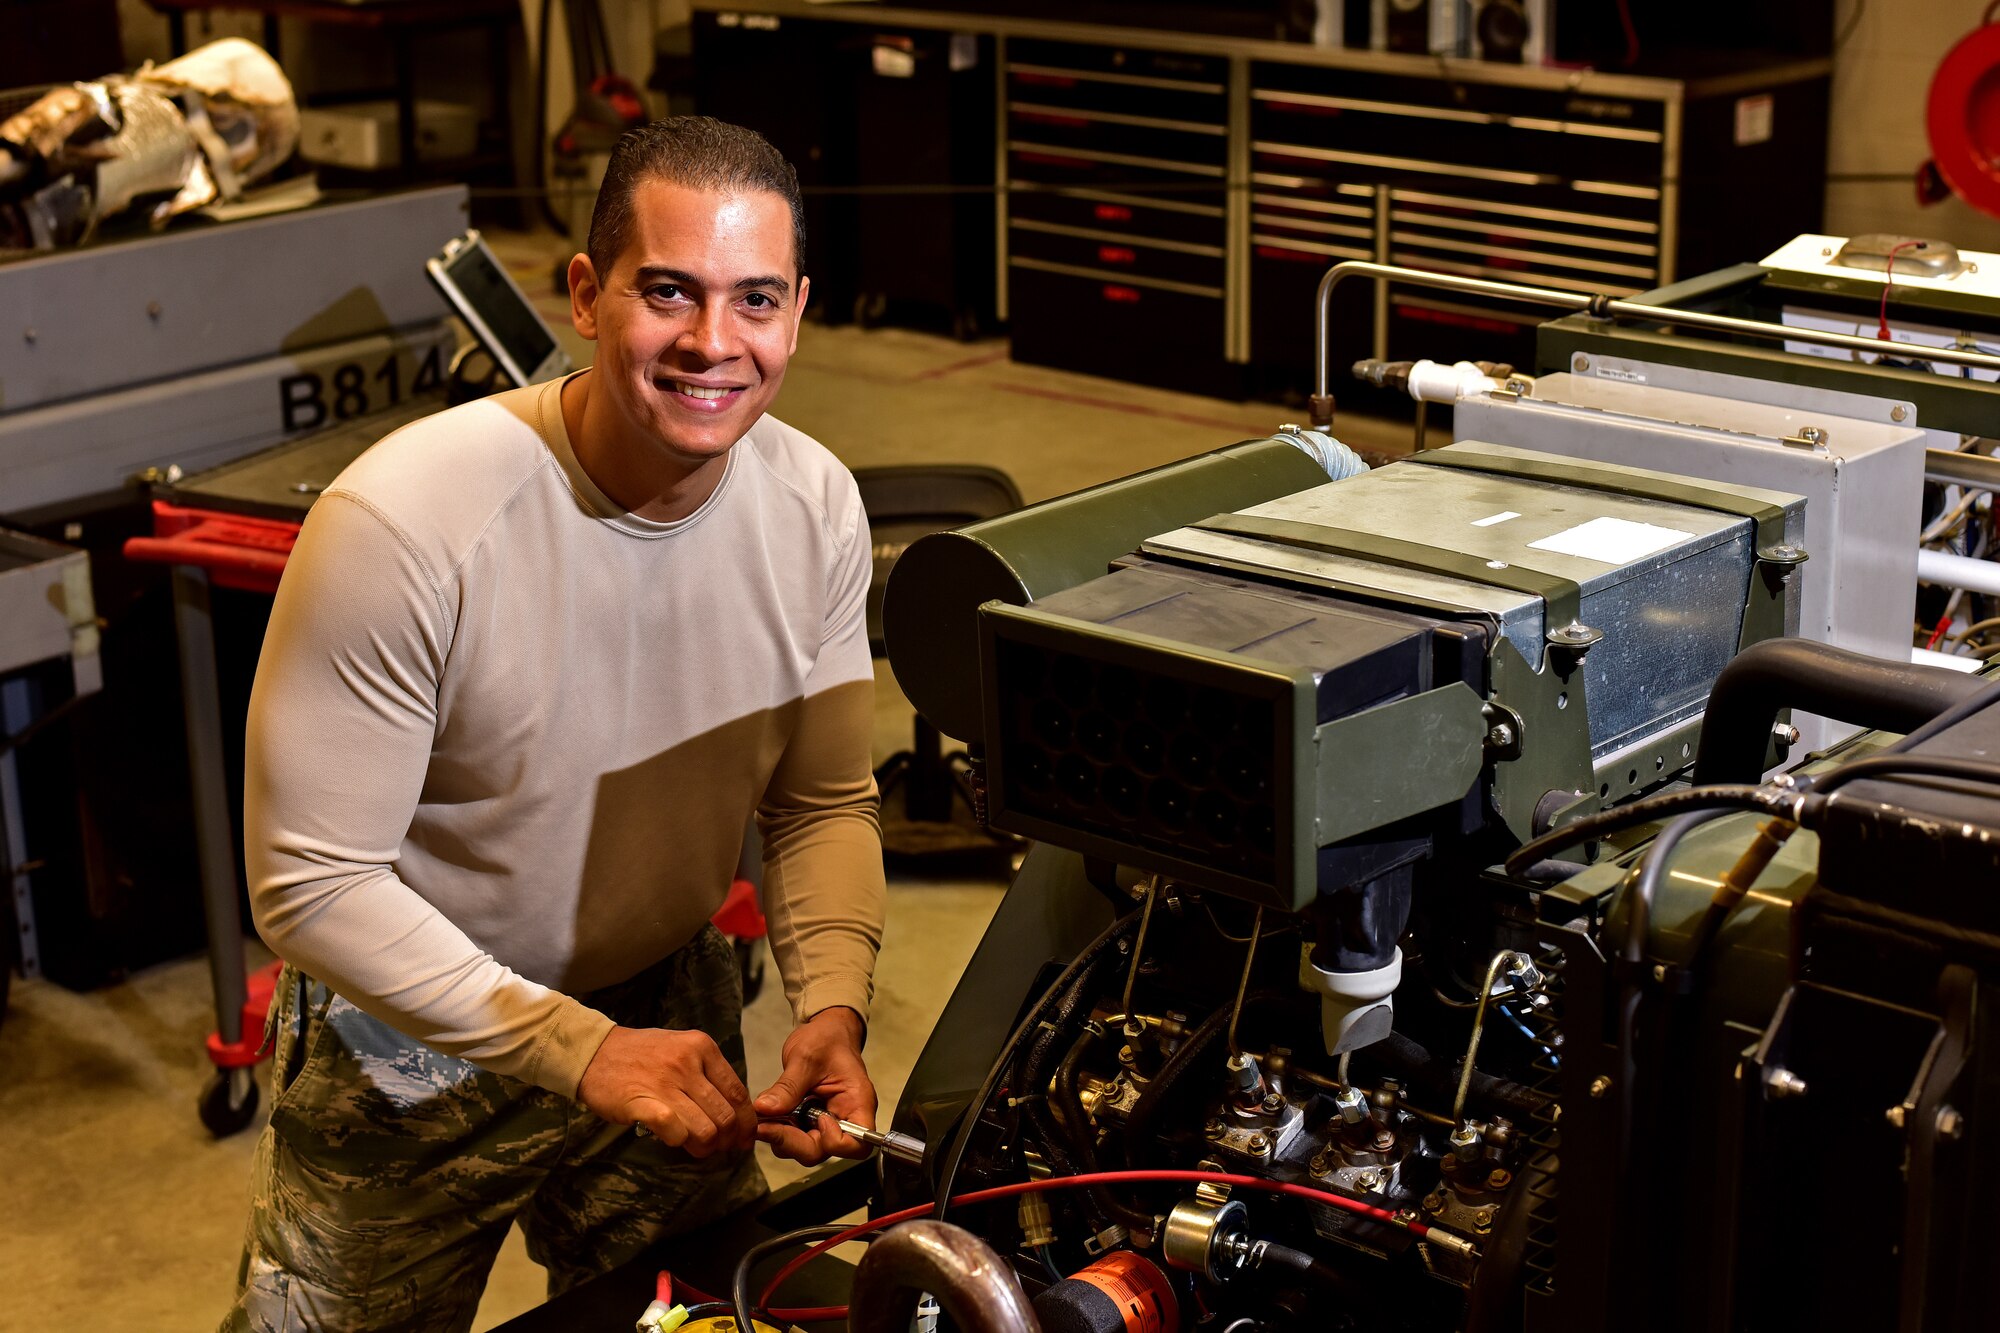 Man holding socket wrench working on equipment smiling at camera